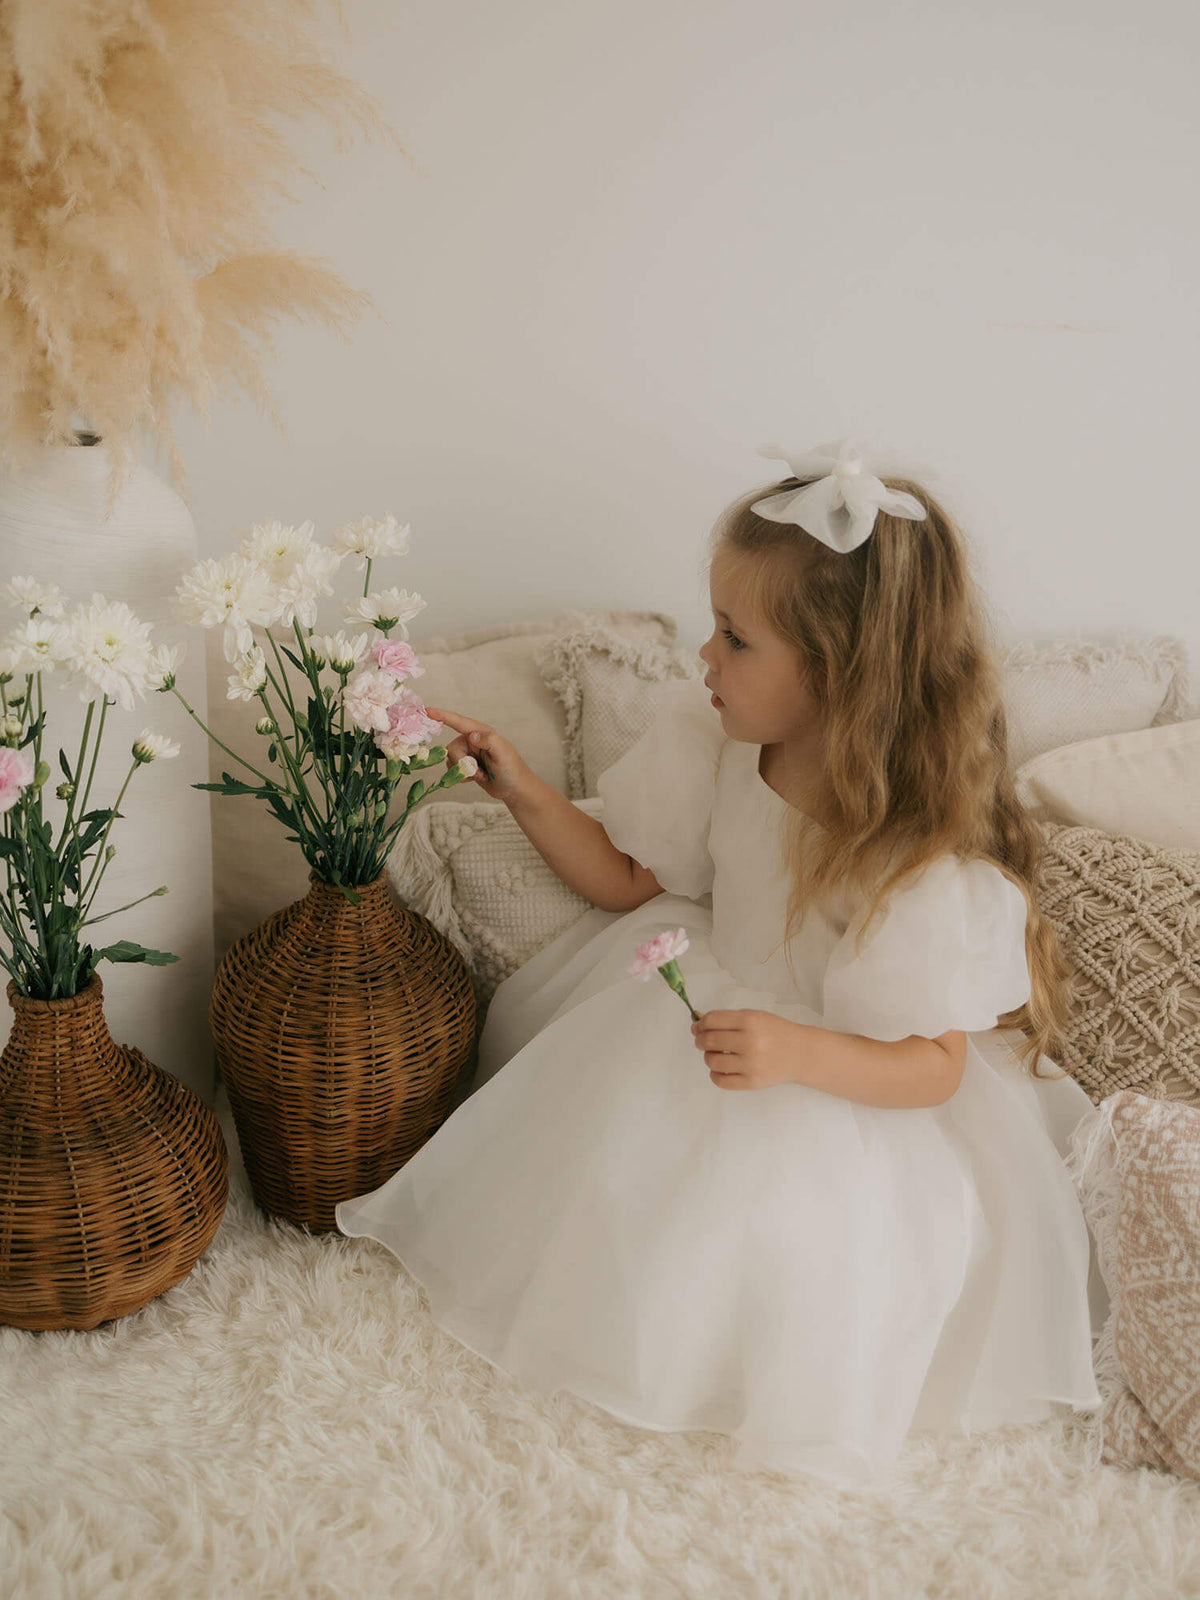 Cleo ivory organza flower girl dress is worn by a young girl who sits playing with flowers. She also wears our medium ivory tulle bow hairclip in her hair.